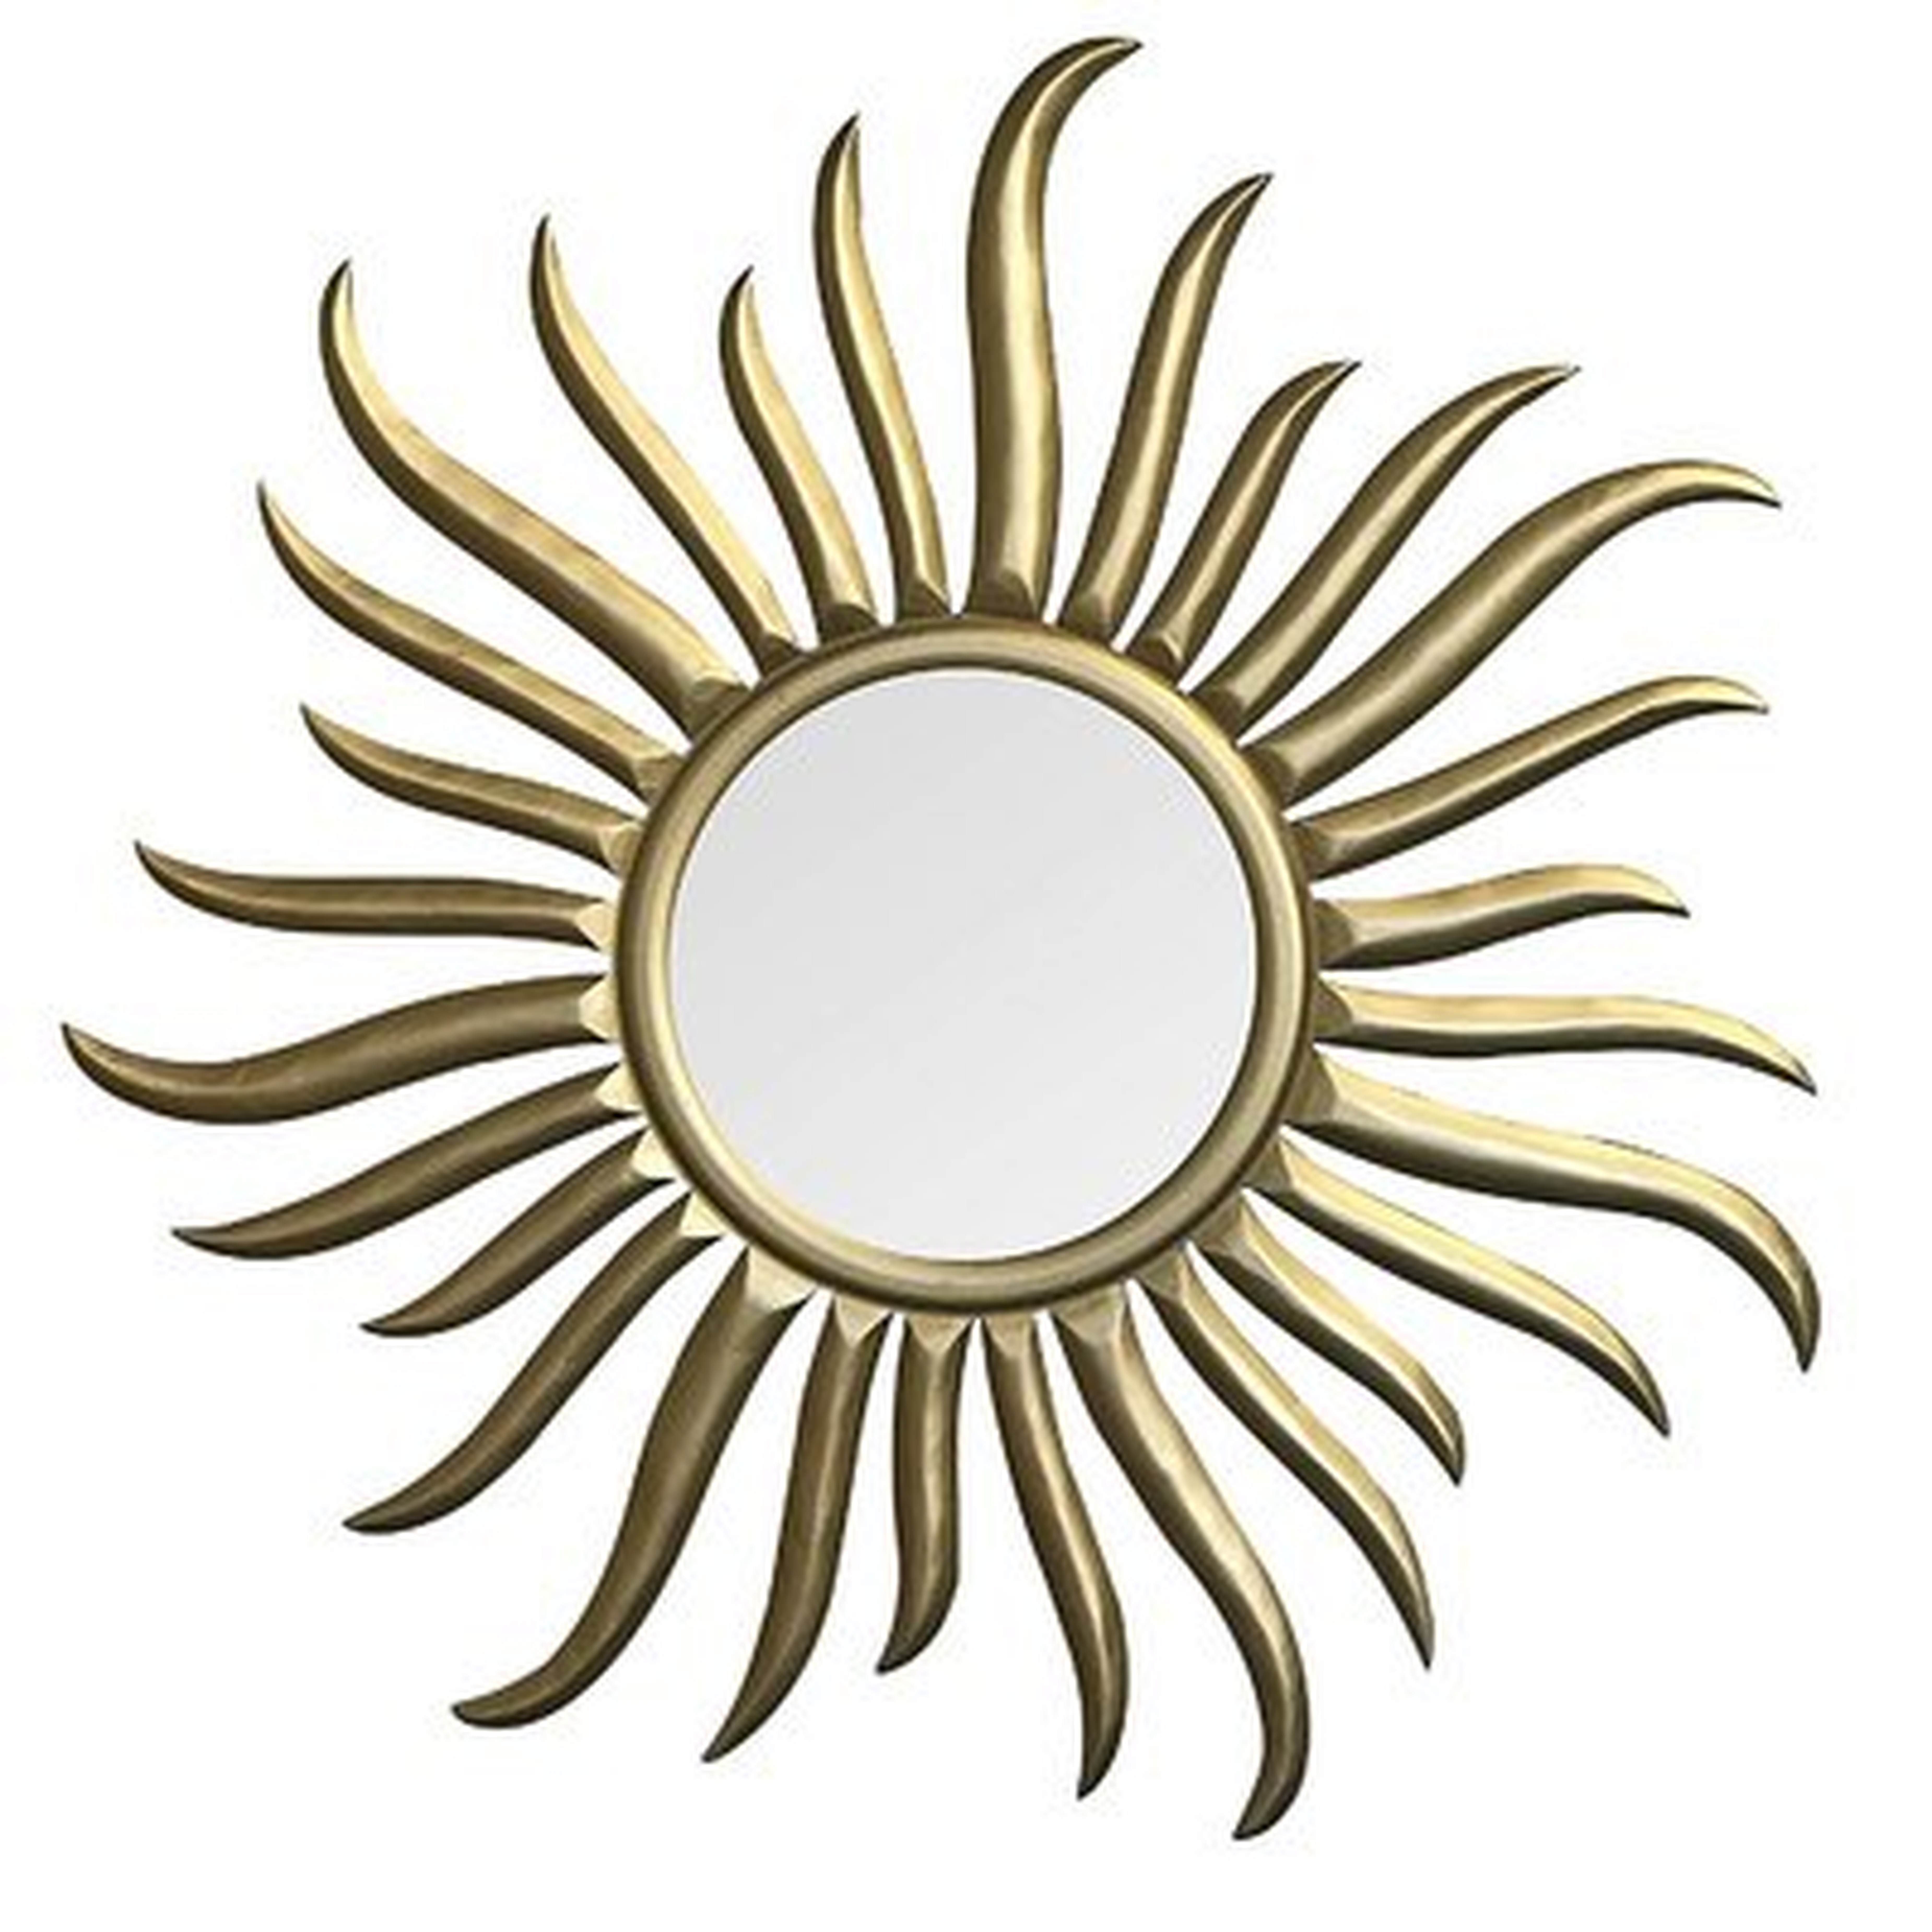 Brazell Hand-Carved and Gilded Wood Sun Accent Mirror - Wayfair